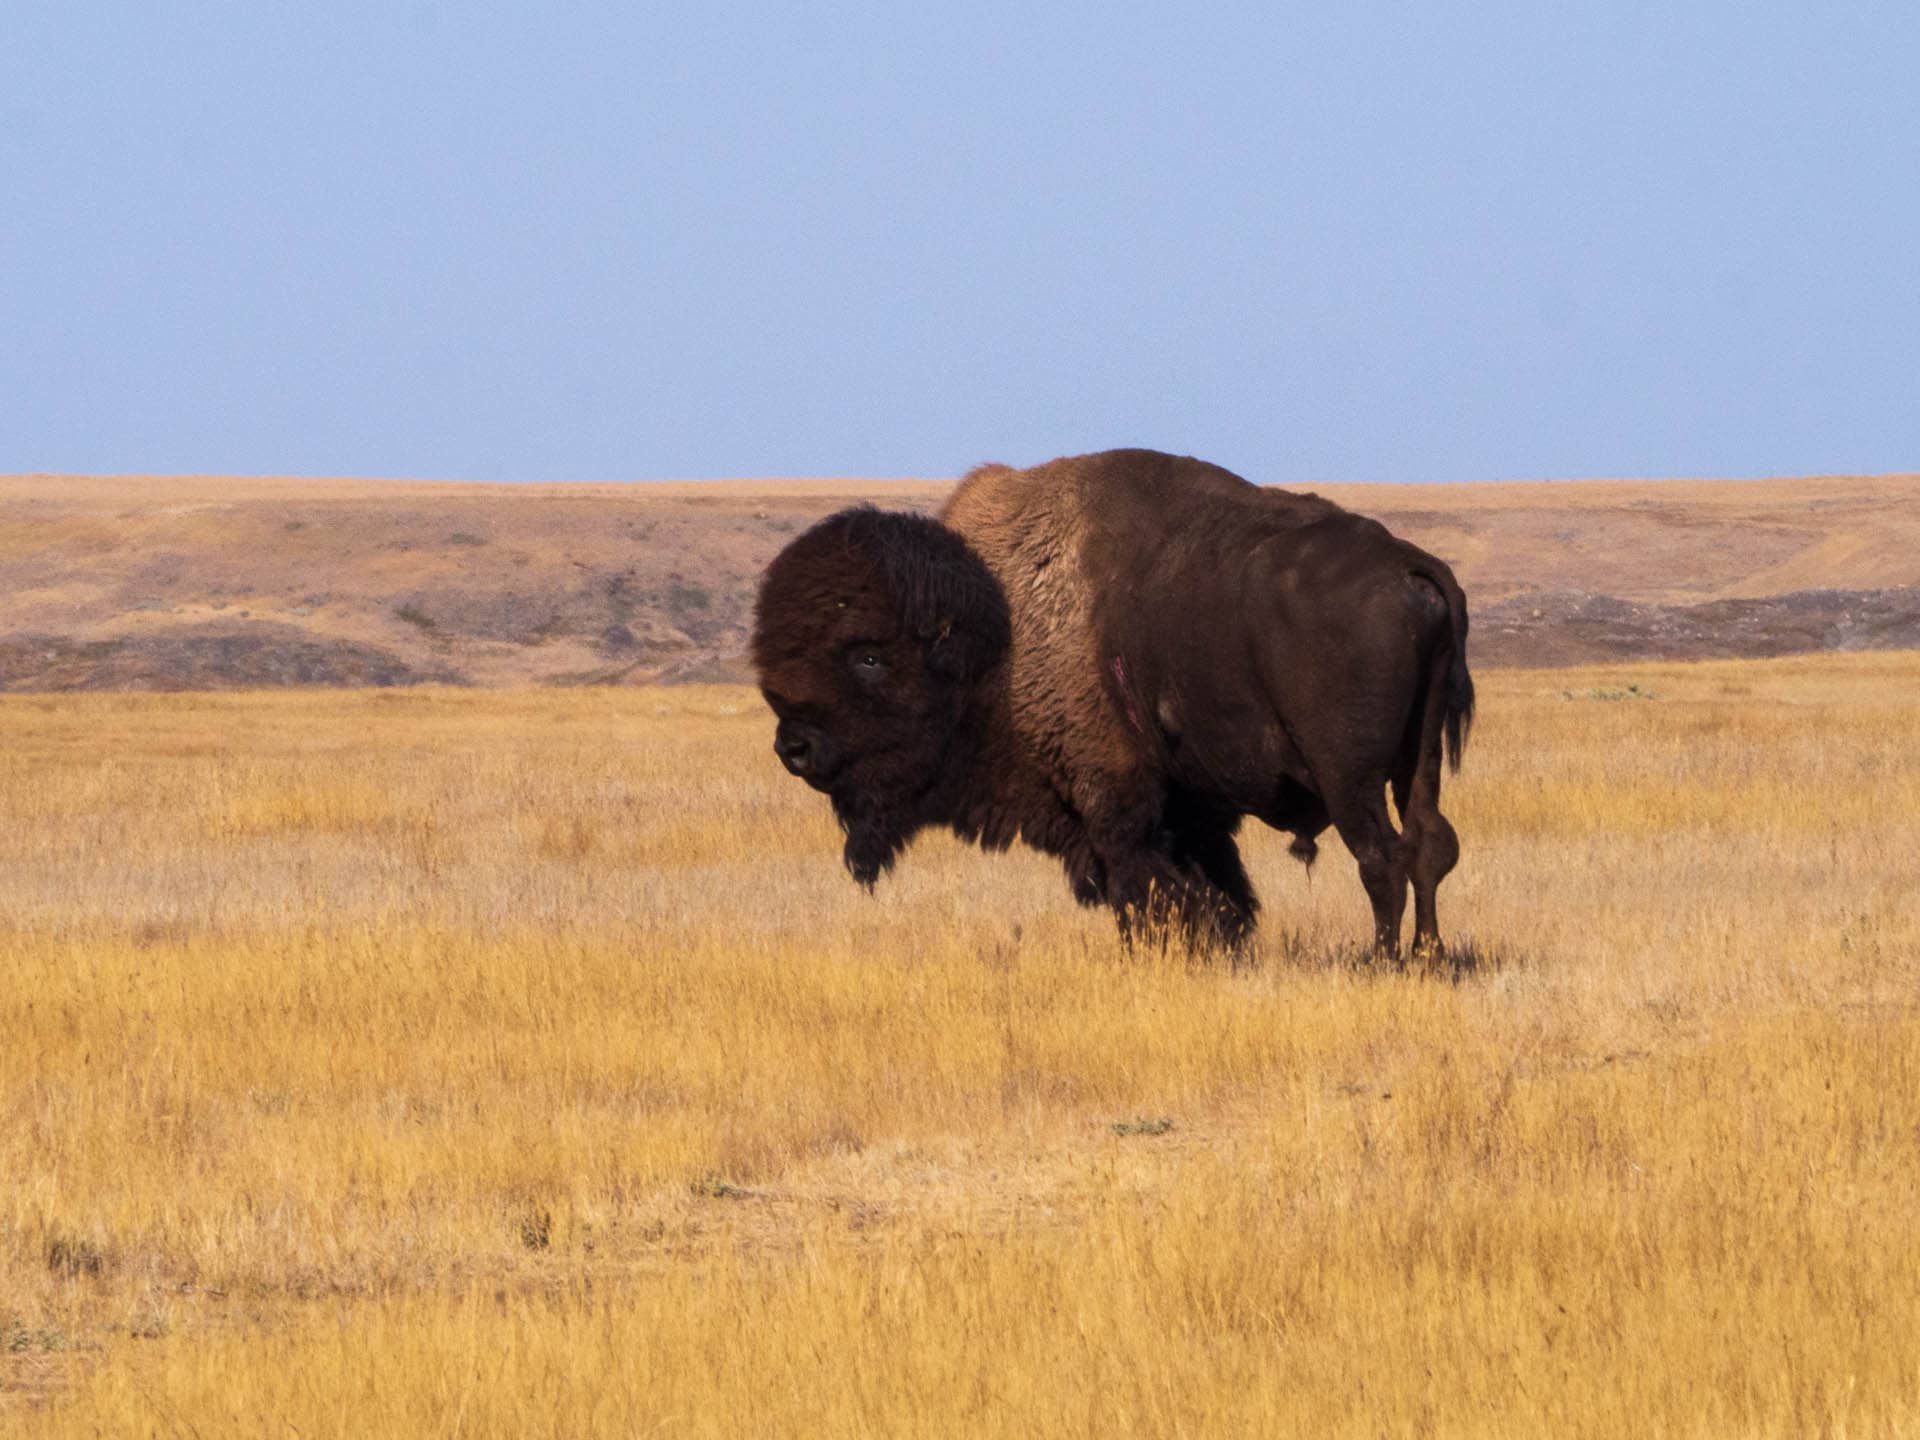 Plains Bison, the largest land animal in North America, reintroduced to its native habitat